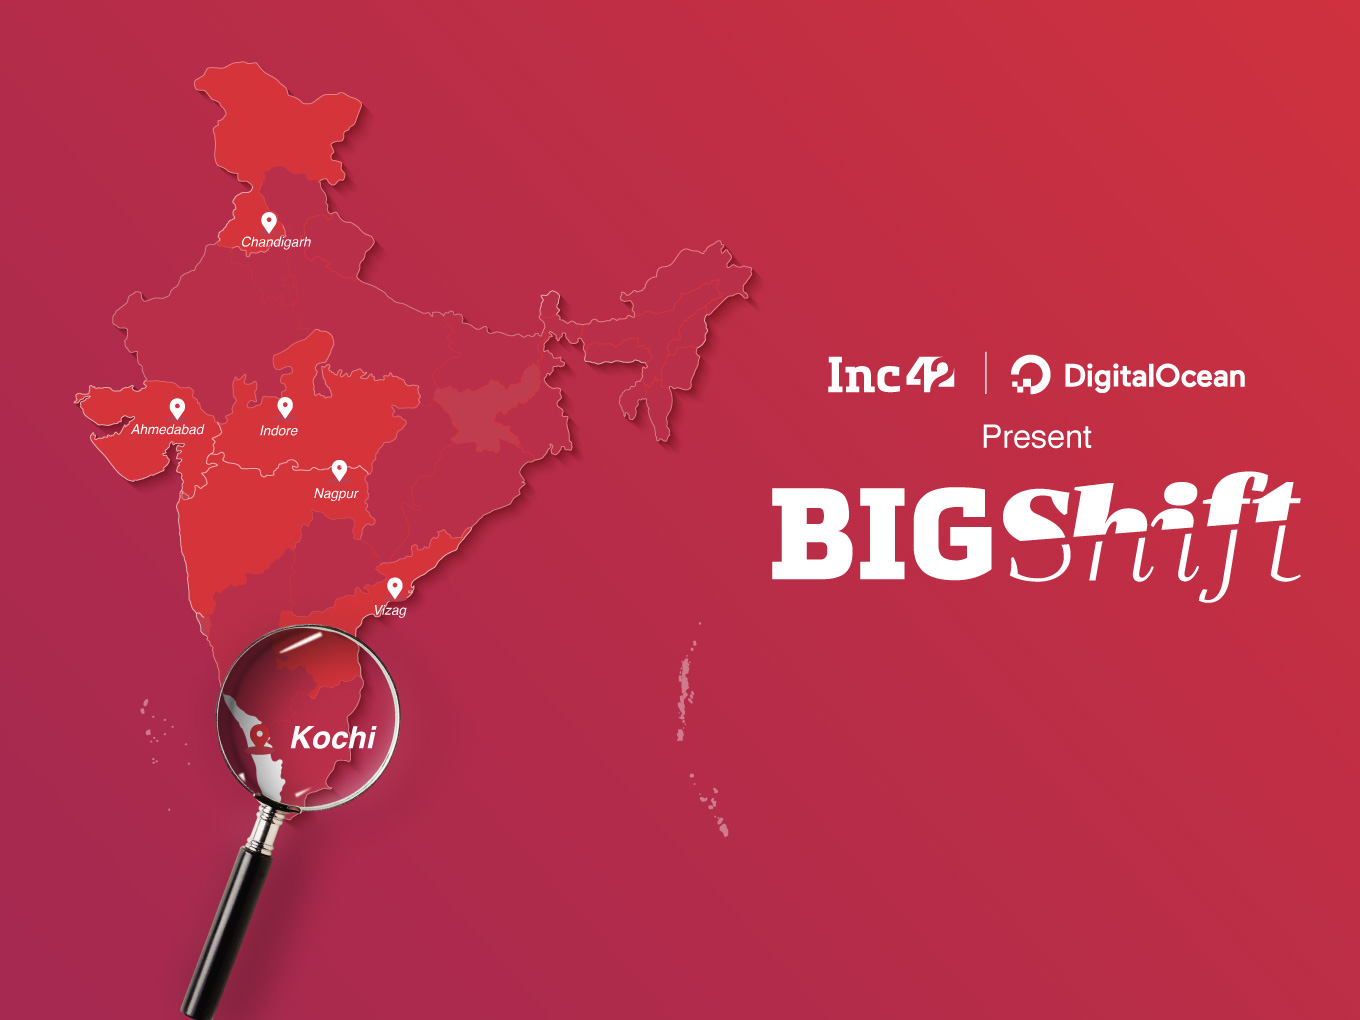 BIGShift arrives in Kochi to celebrate the thriving ecosystem of the city